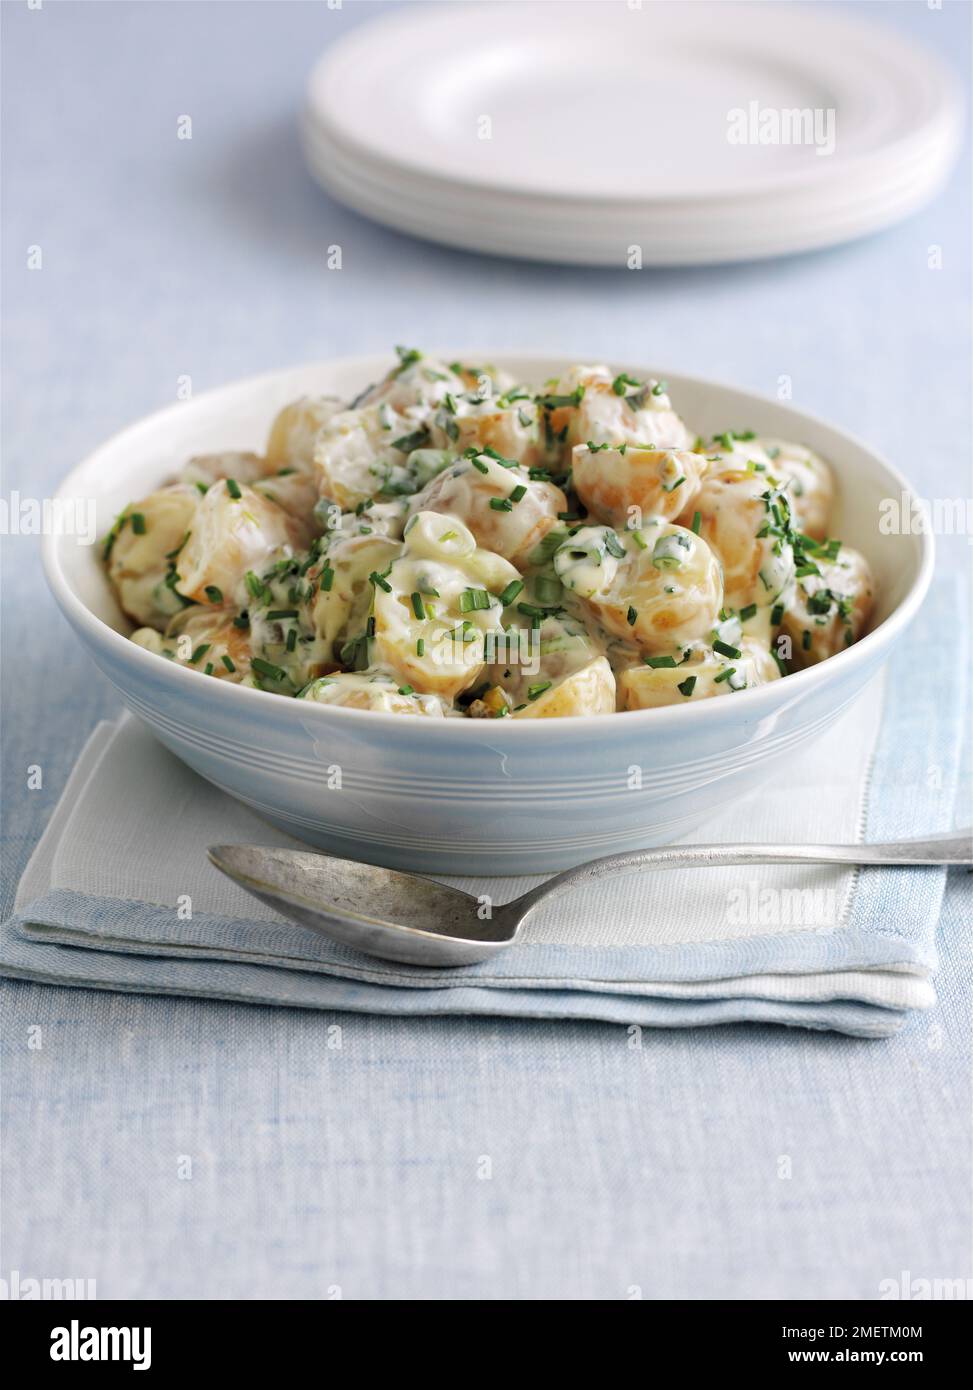 Potato salad with mayonnaise, chopped gherkins, spring onions, chives and tarragon Stock Photo